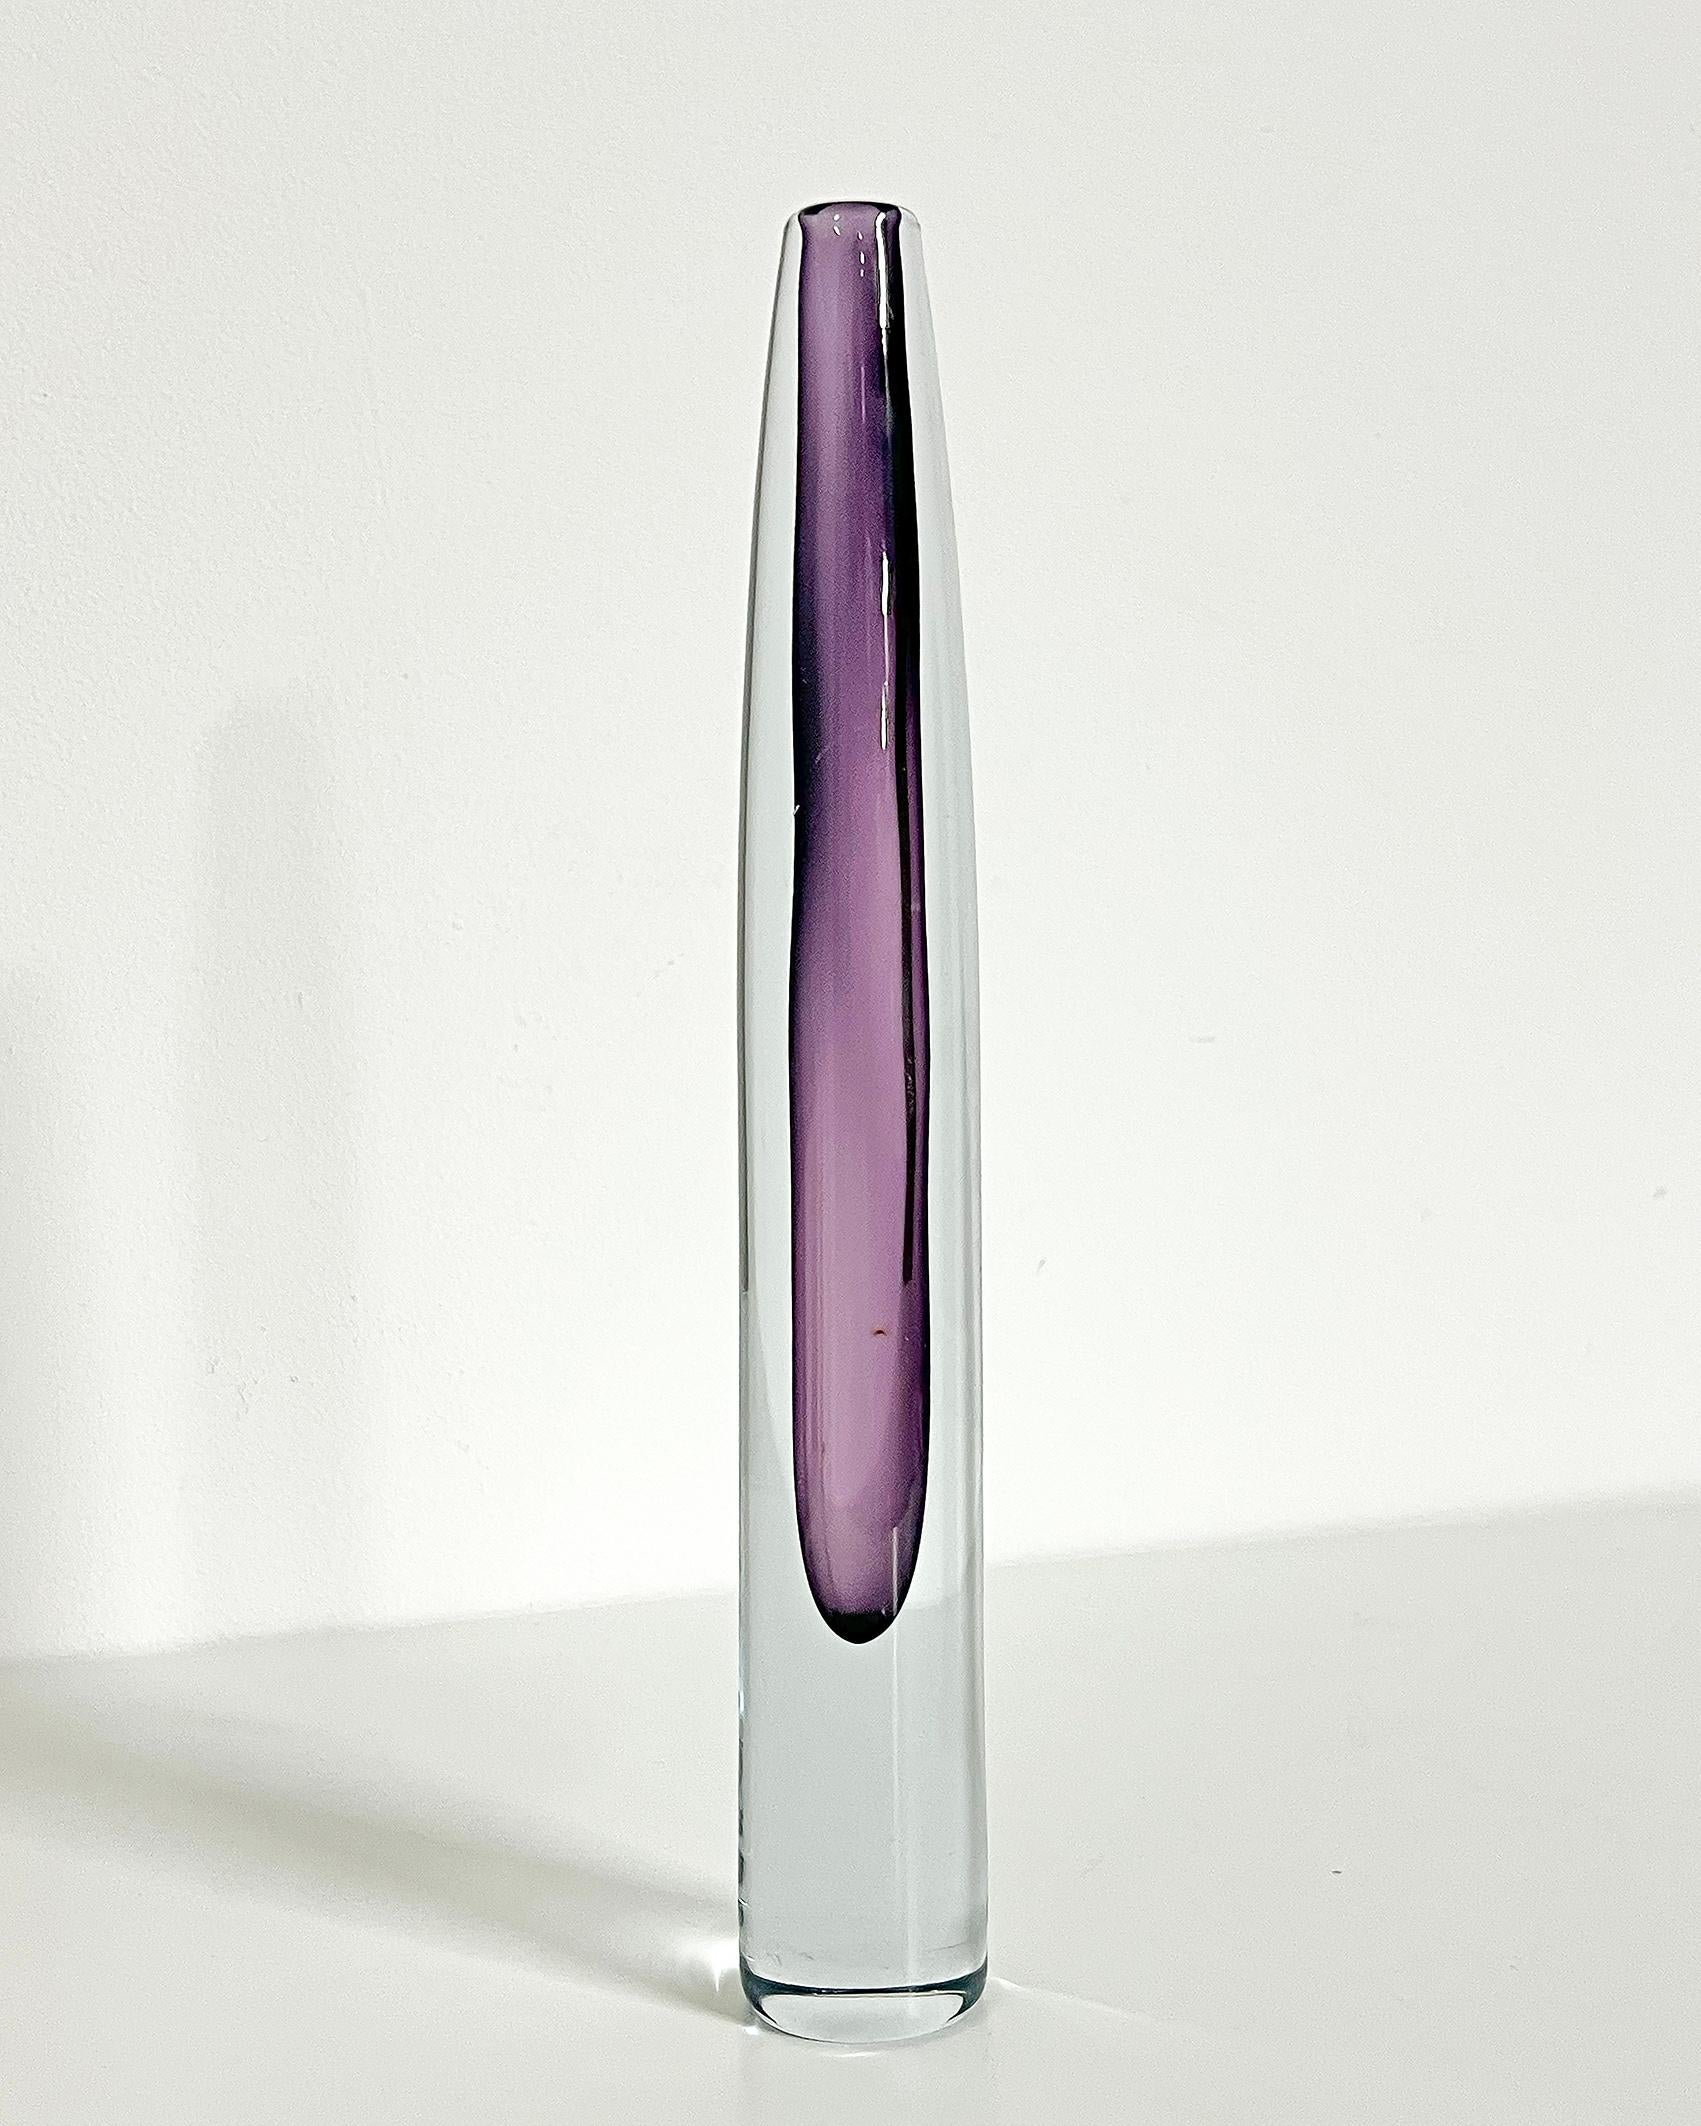 Beautiful Scandinavian Modern vase in purple by Gunnar Nylund for Strömbergshyttan -1950's.
Unsigned. Wear and patina consistent with age and use. Scratches, some small brown spots inside the vase. 
